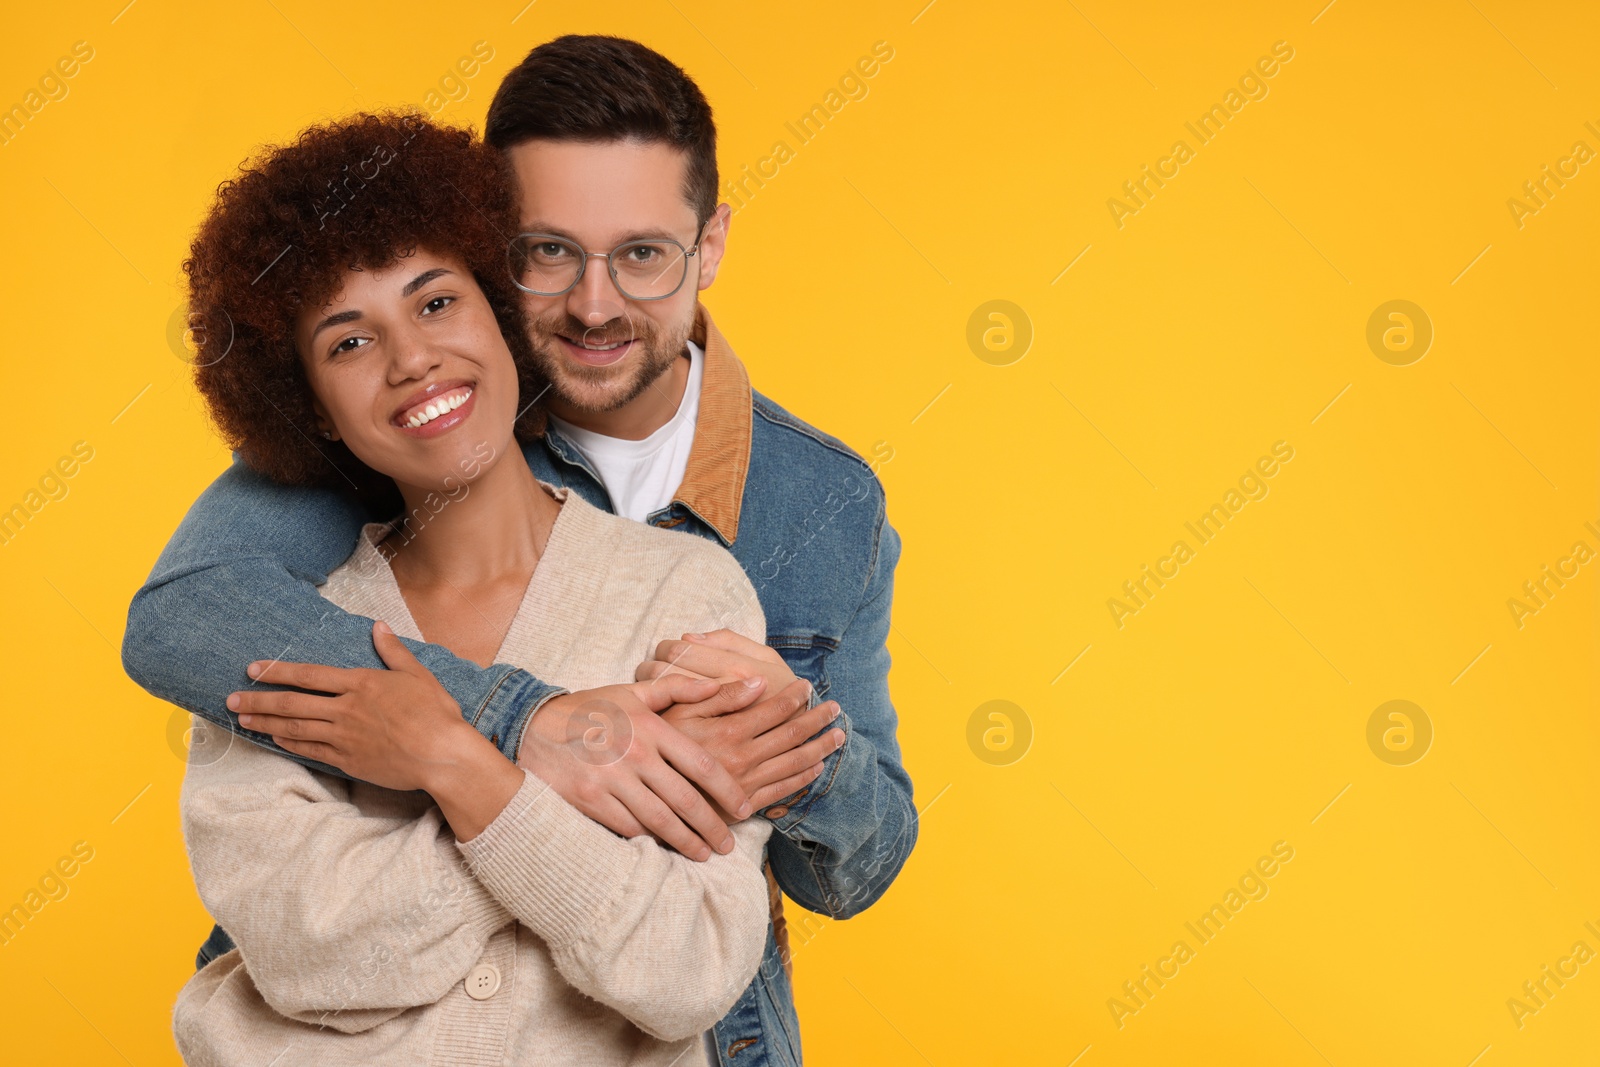 Photo of International dating. Happy couple hugging on orange background, space for text